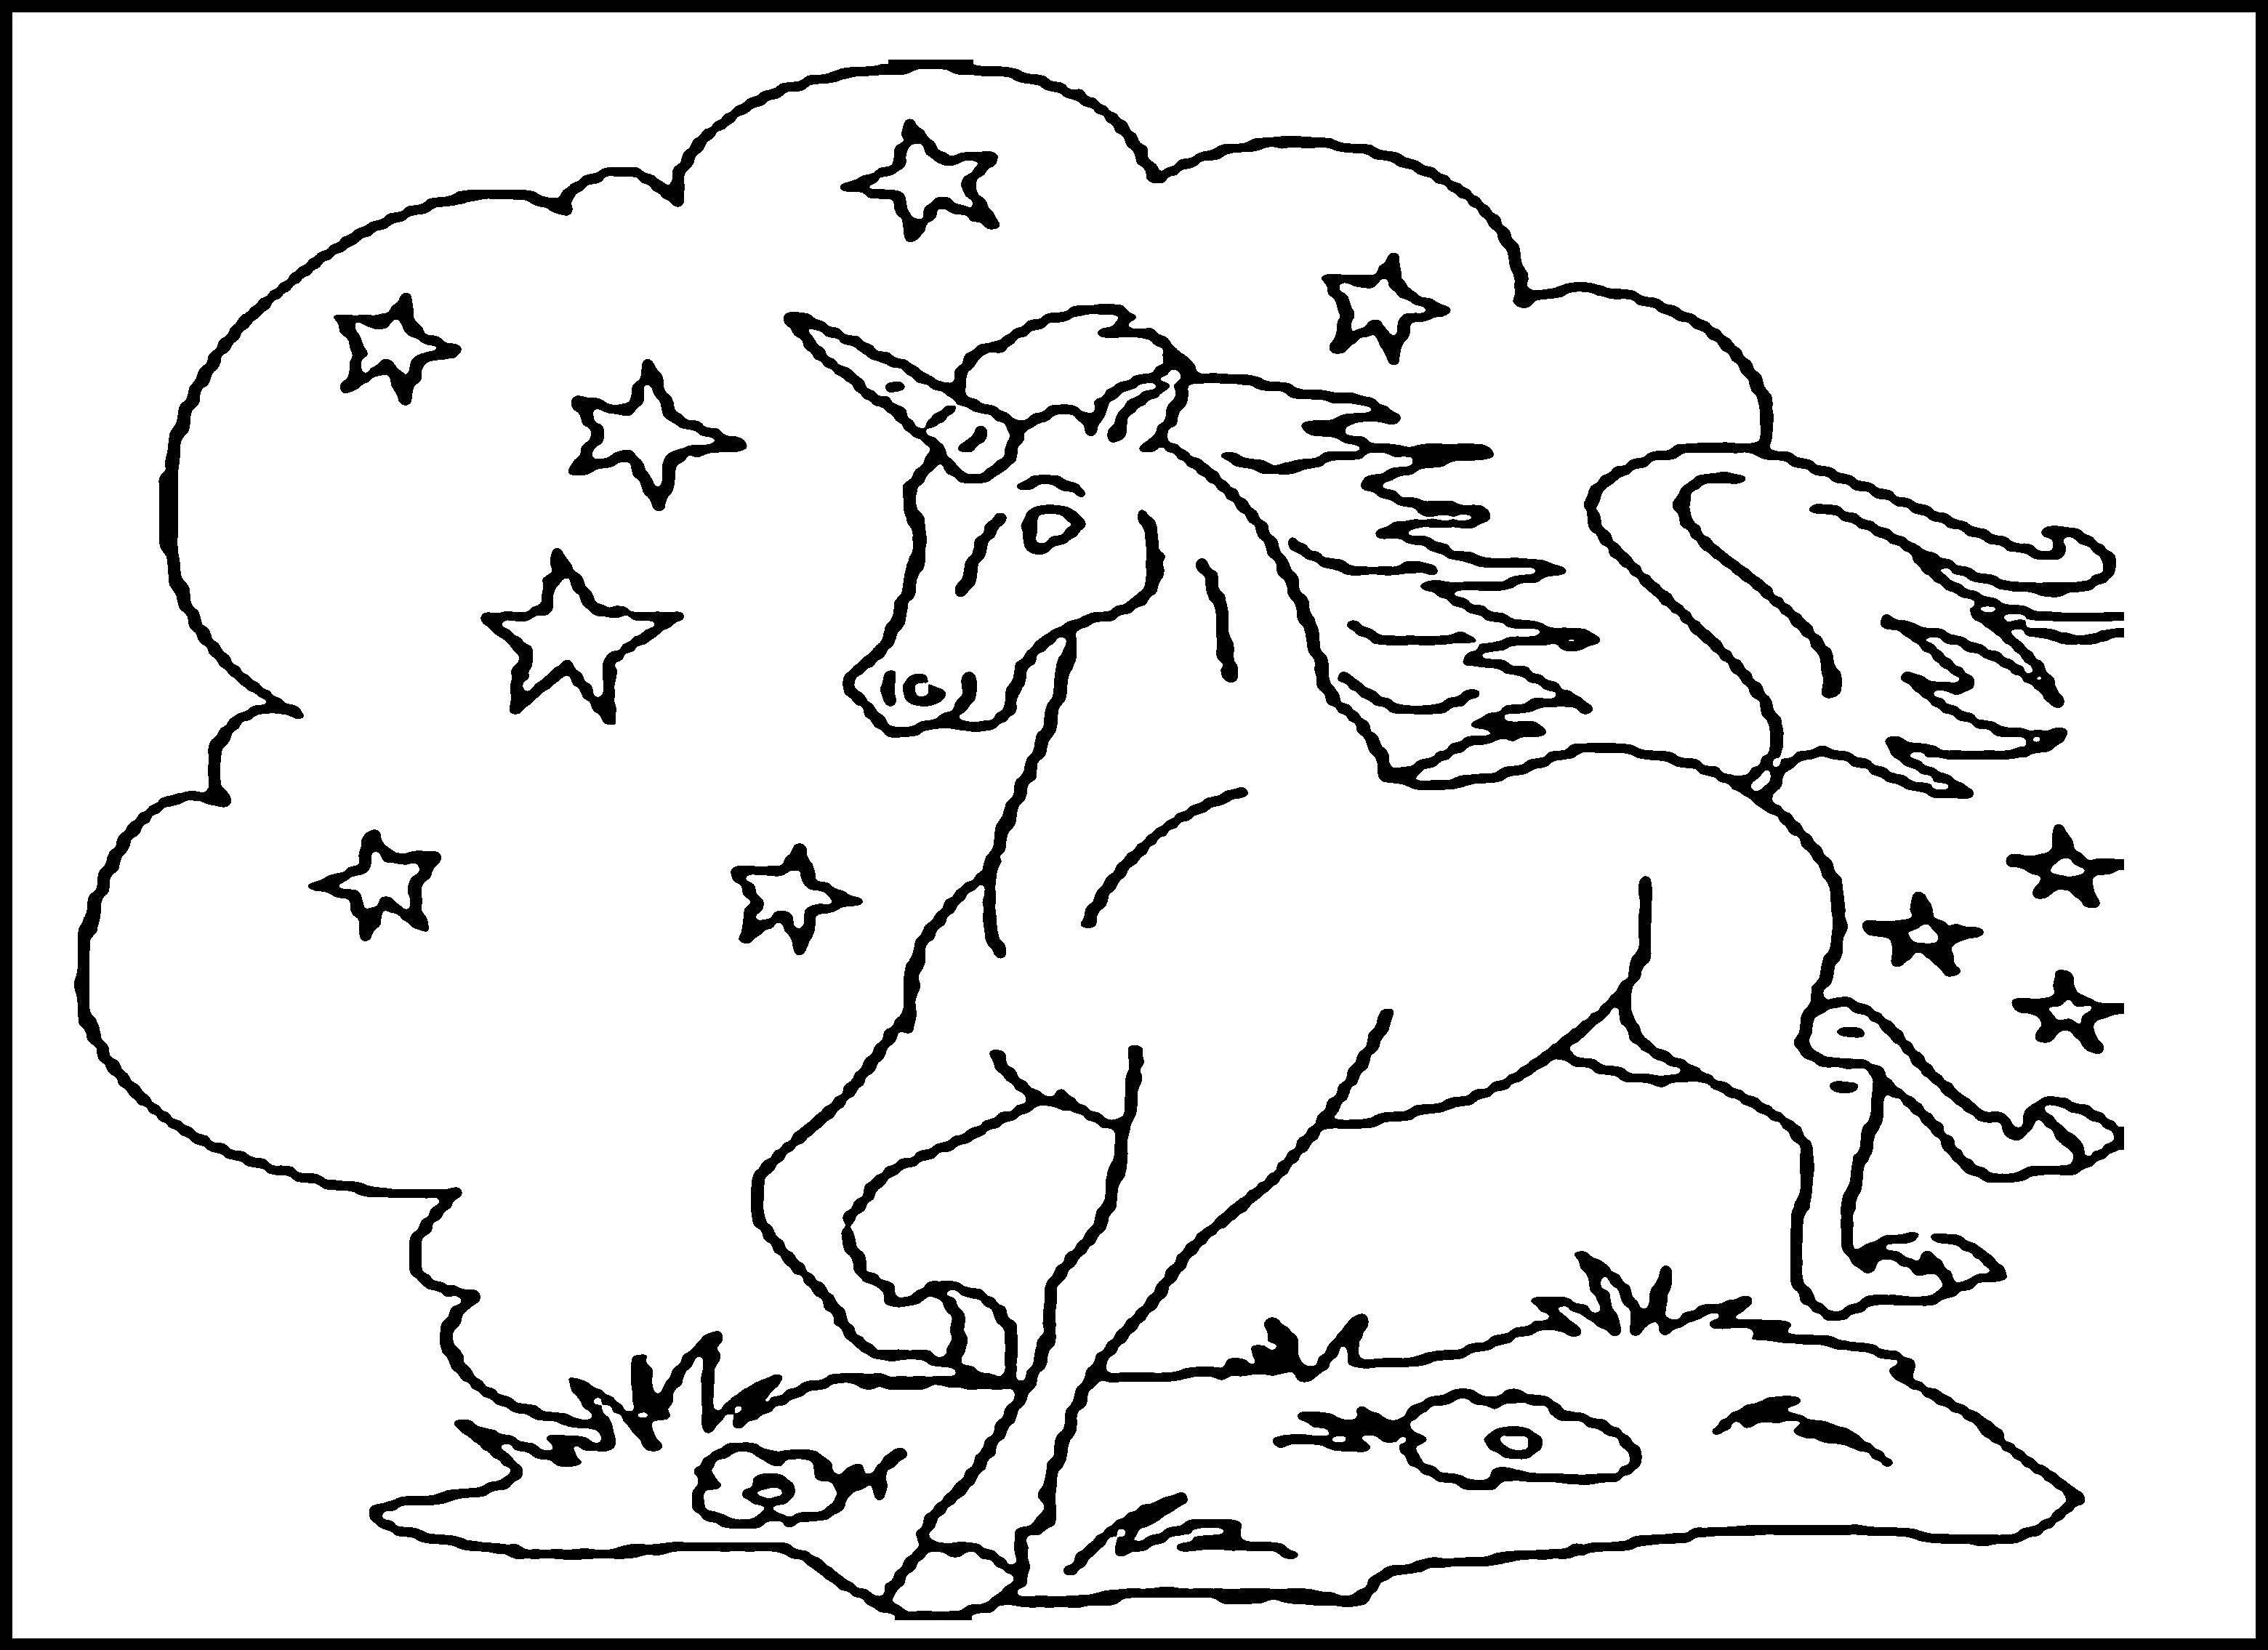 Coloring Unicorn galloping in the night. Category The magic of creation. Tags:  unicorn, horse.